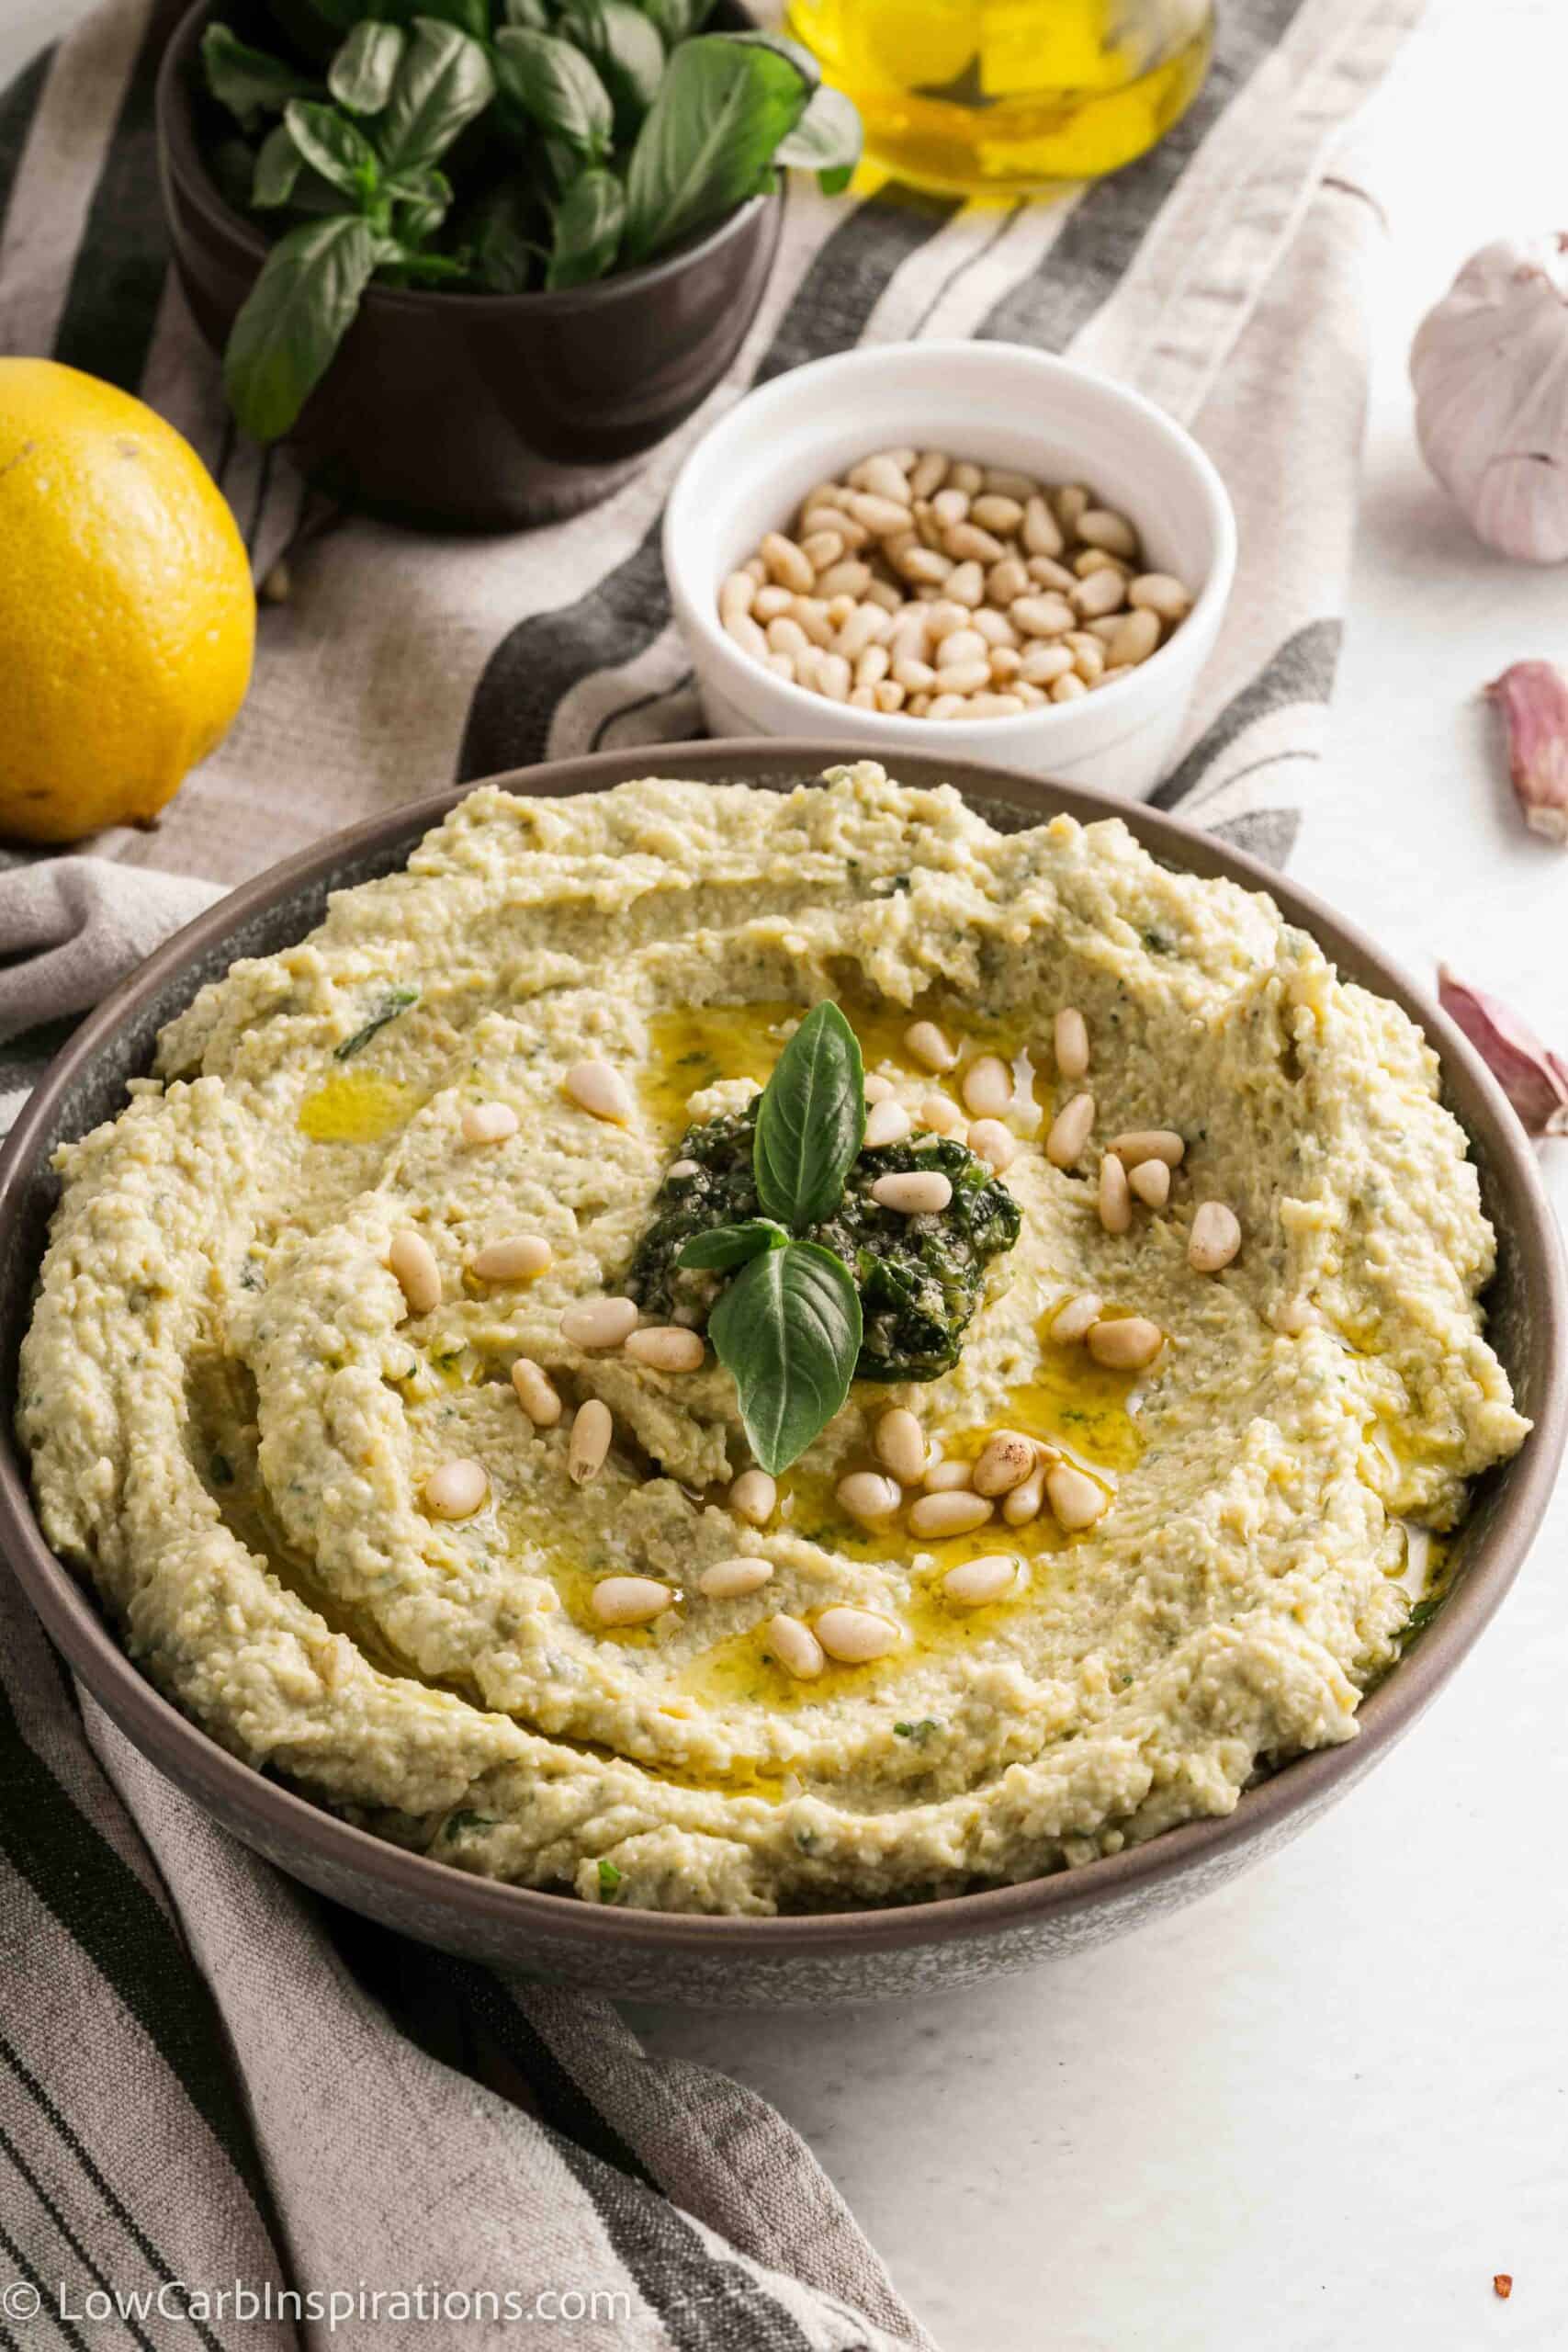 Low Carb Pesto Hummus Recipe: A Delicious and Nutritious Dip for Snacking